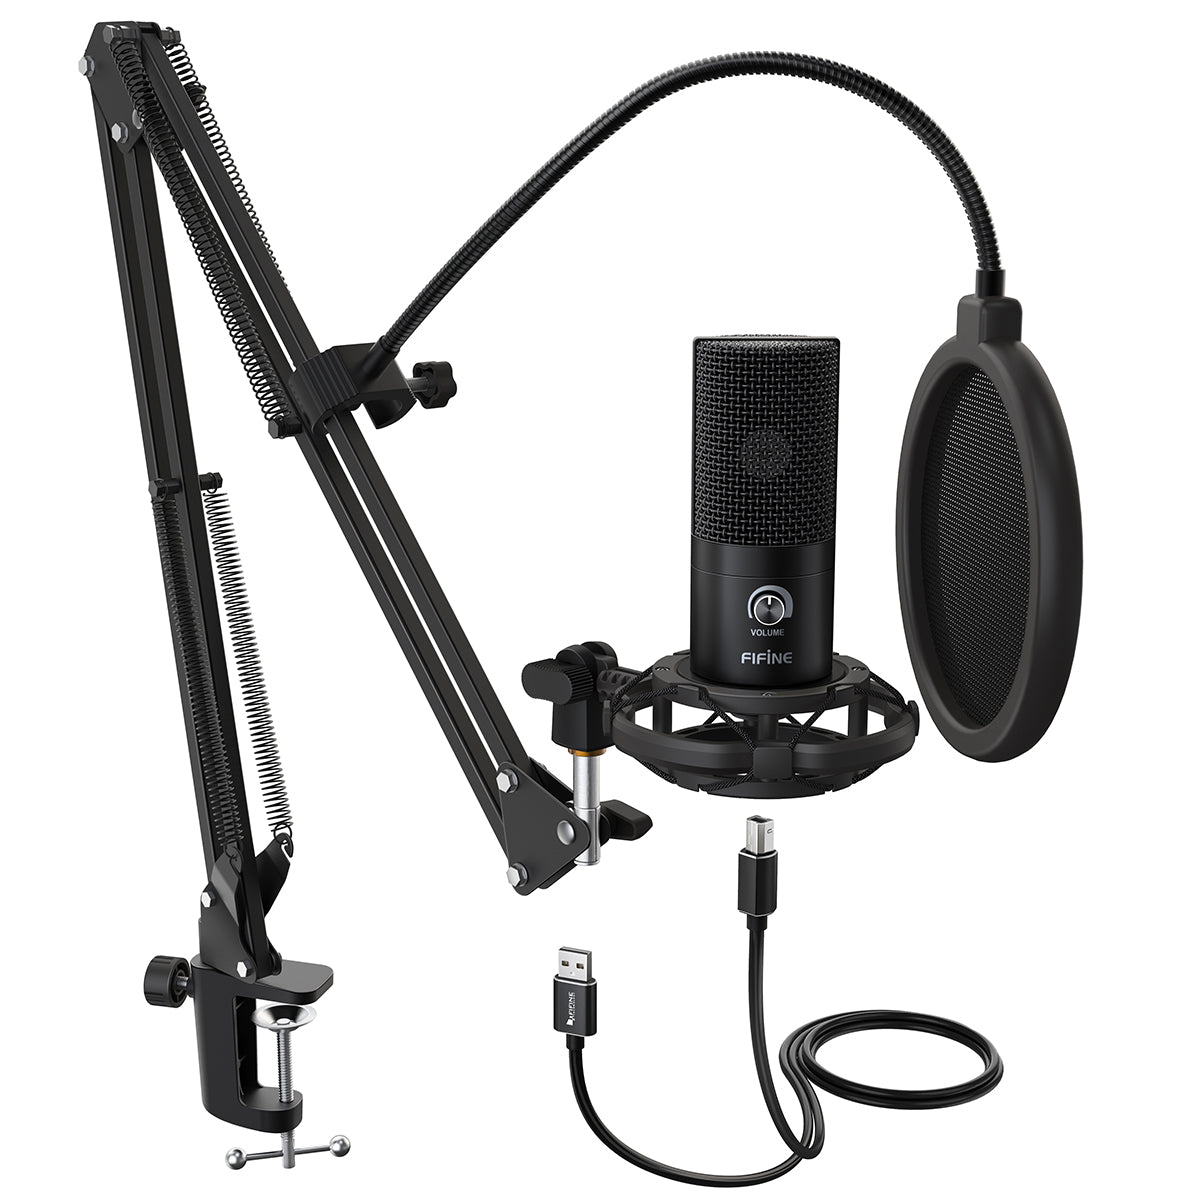 FIFINE K669 USB Microphone with Volume Dial for Streaming, Vocal Recor